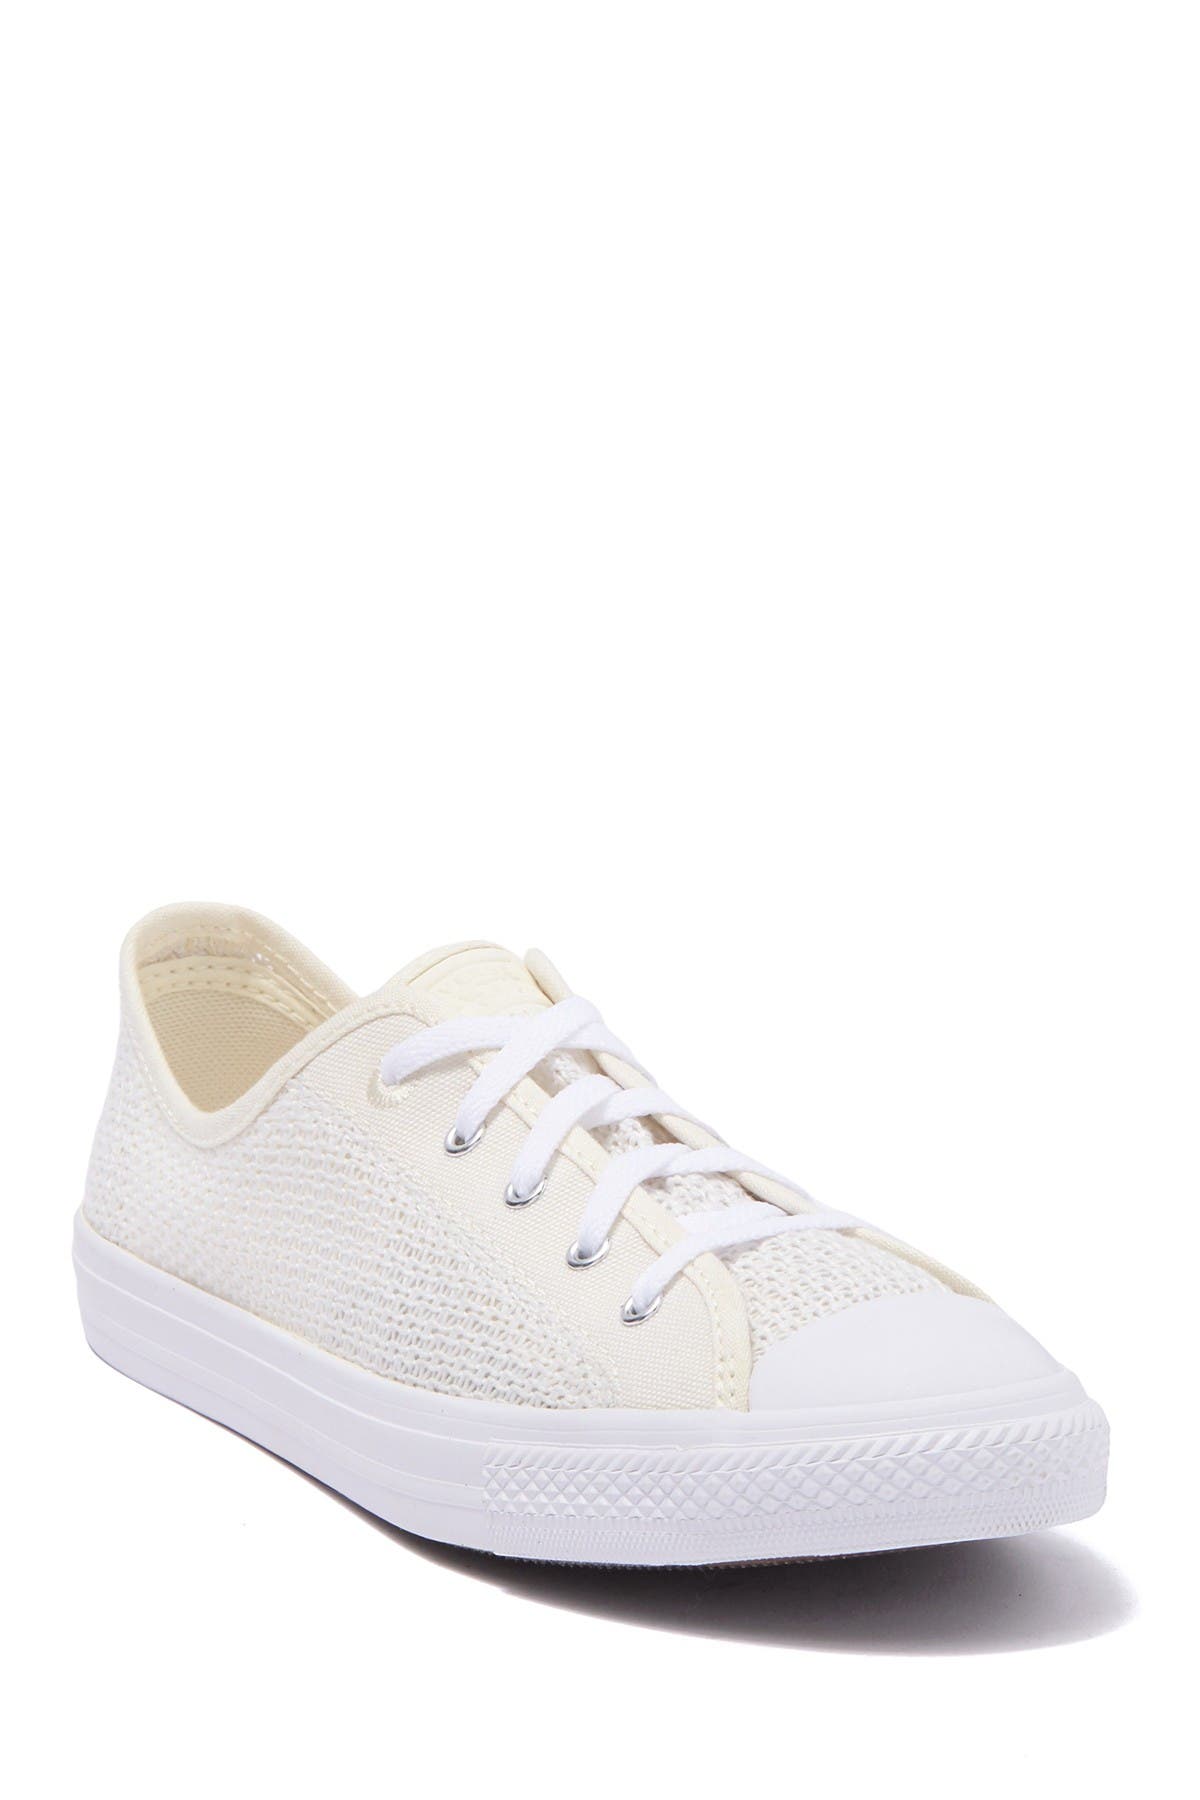 converse dainty lace up sneaker